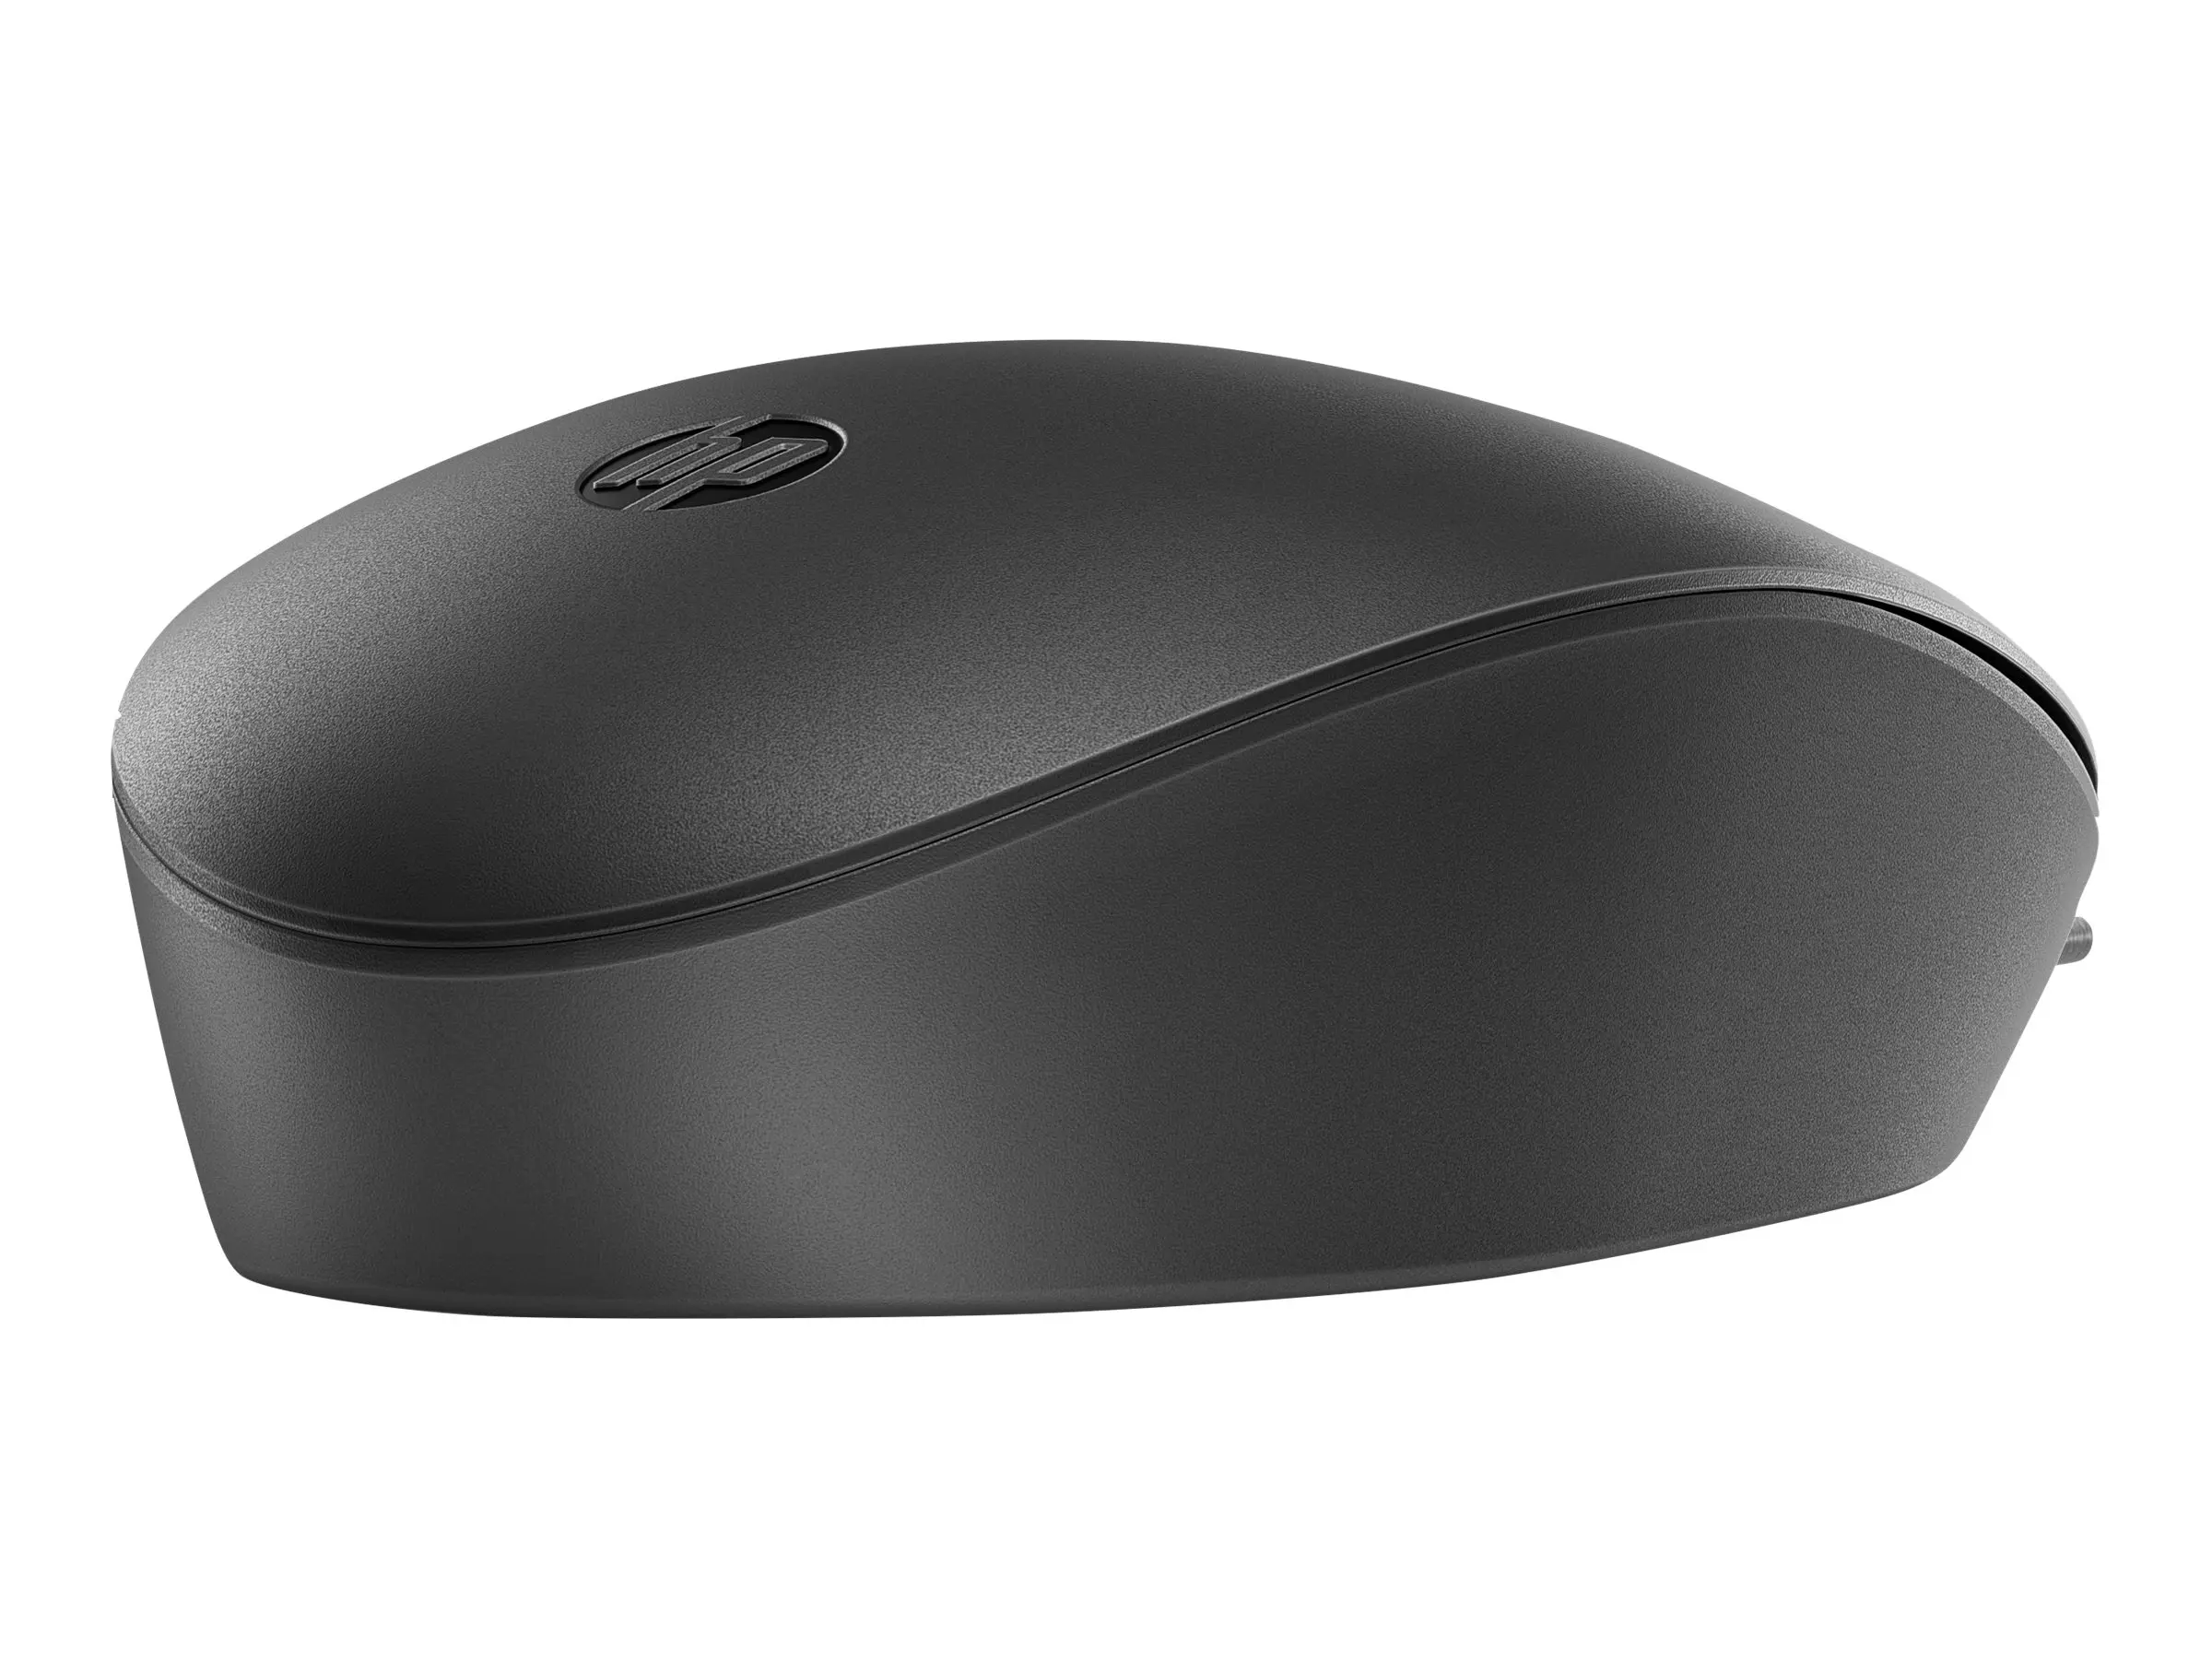 HP 128 laser wired mouse - image 2